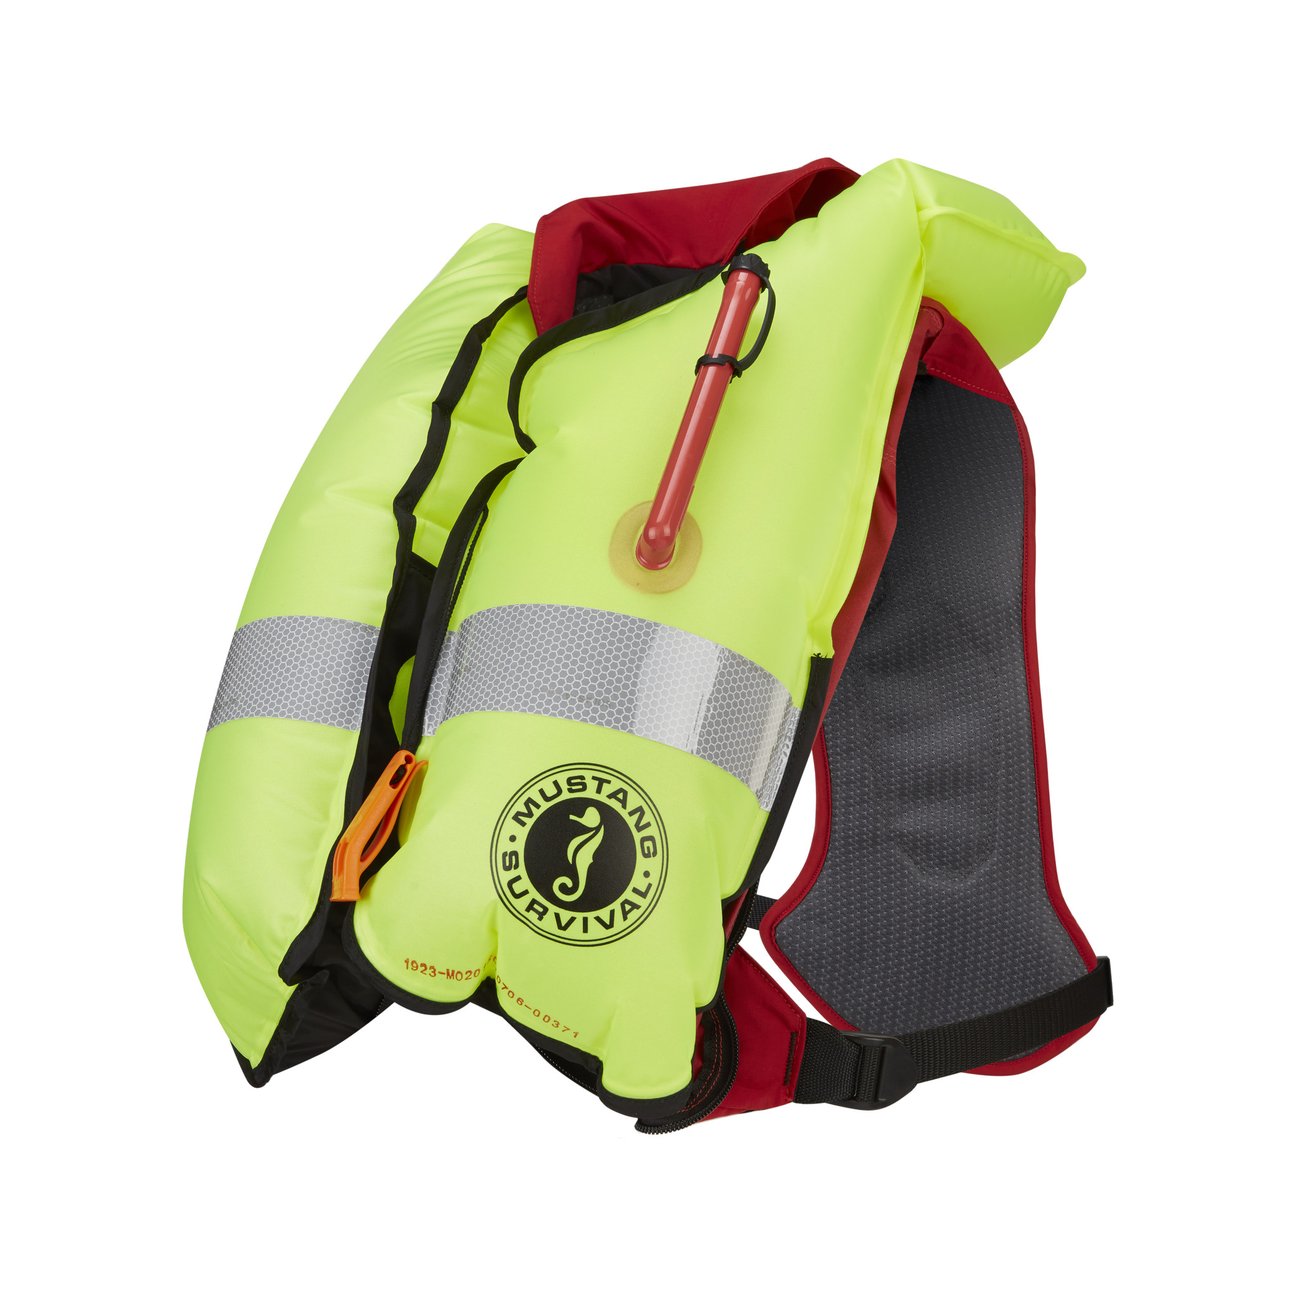 Mustang Survival BASS Competition Auto Hydrostatic Inflatable PFD 